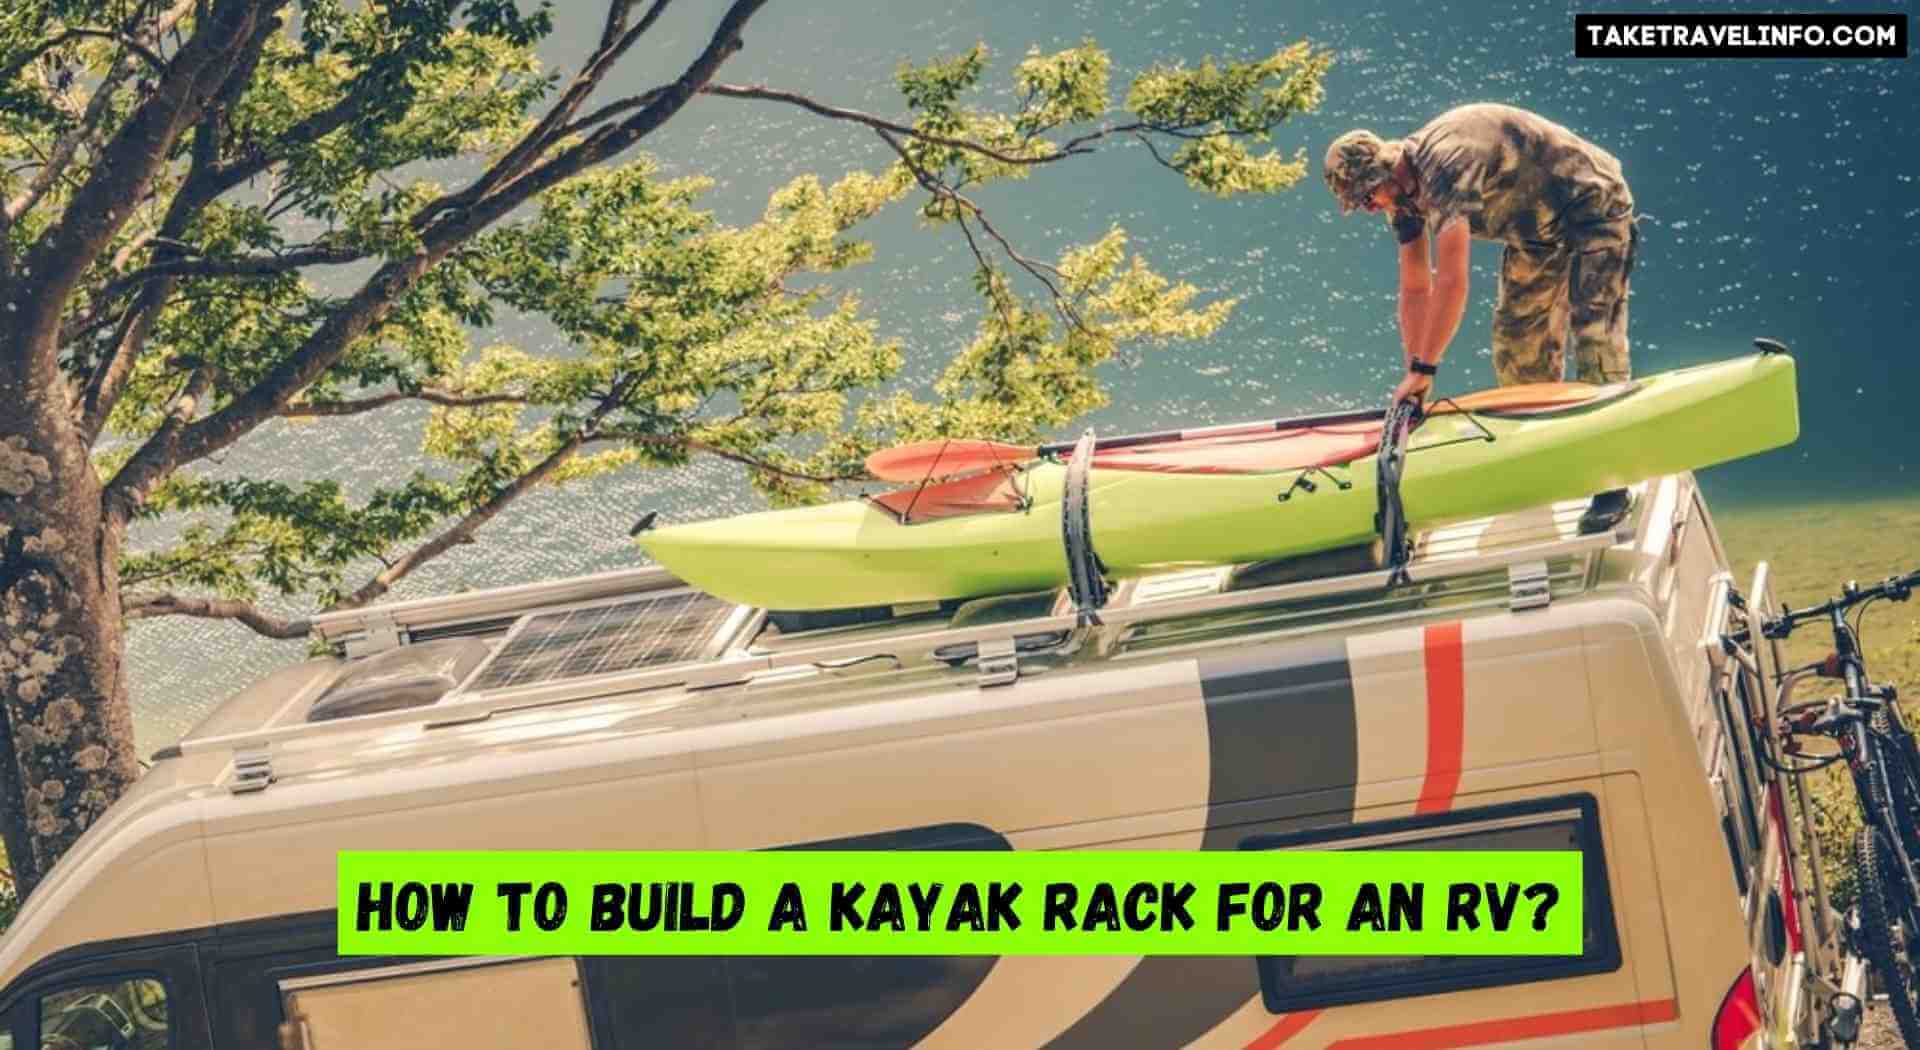 How to Build a Kayak Rack for an RV?